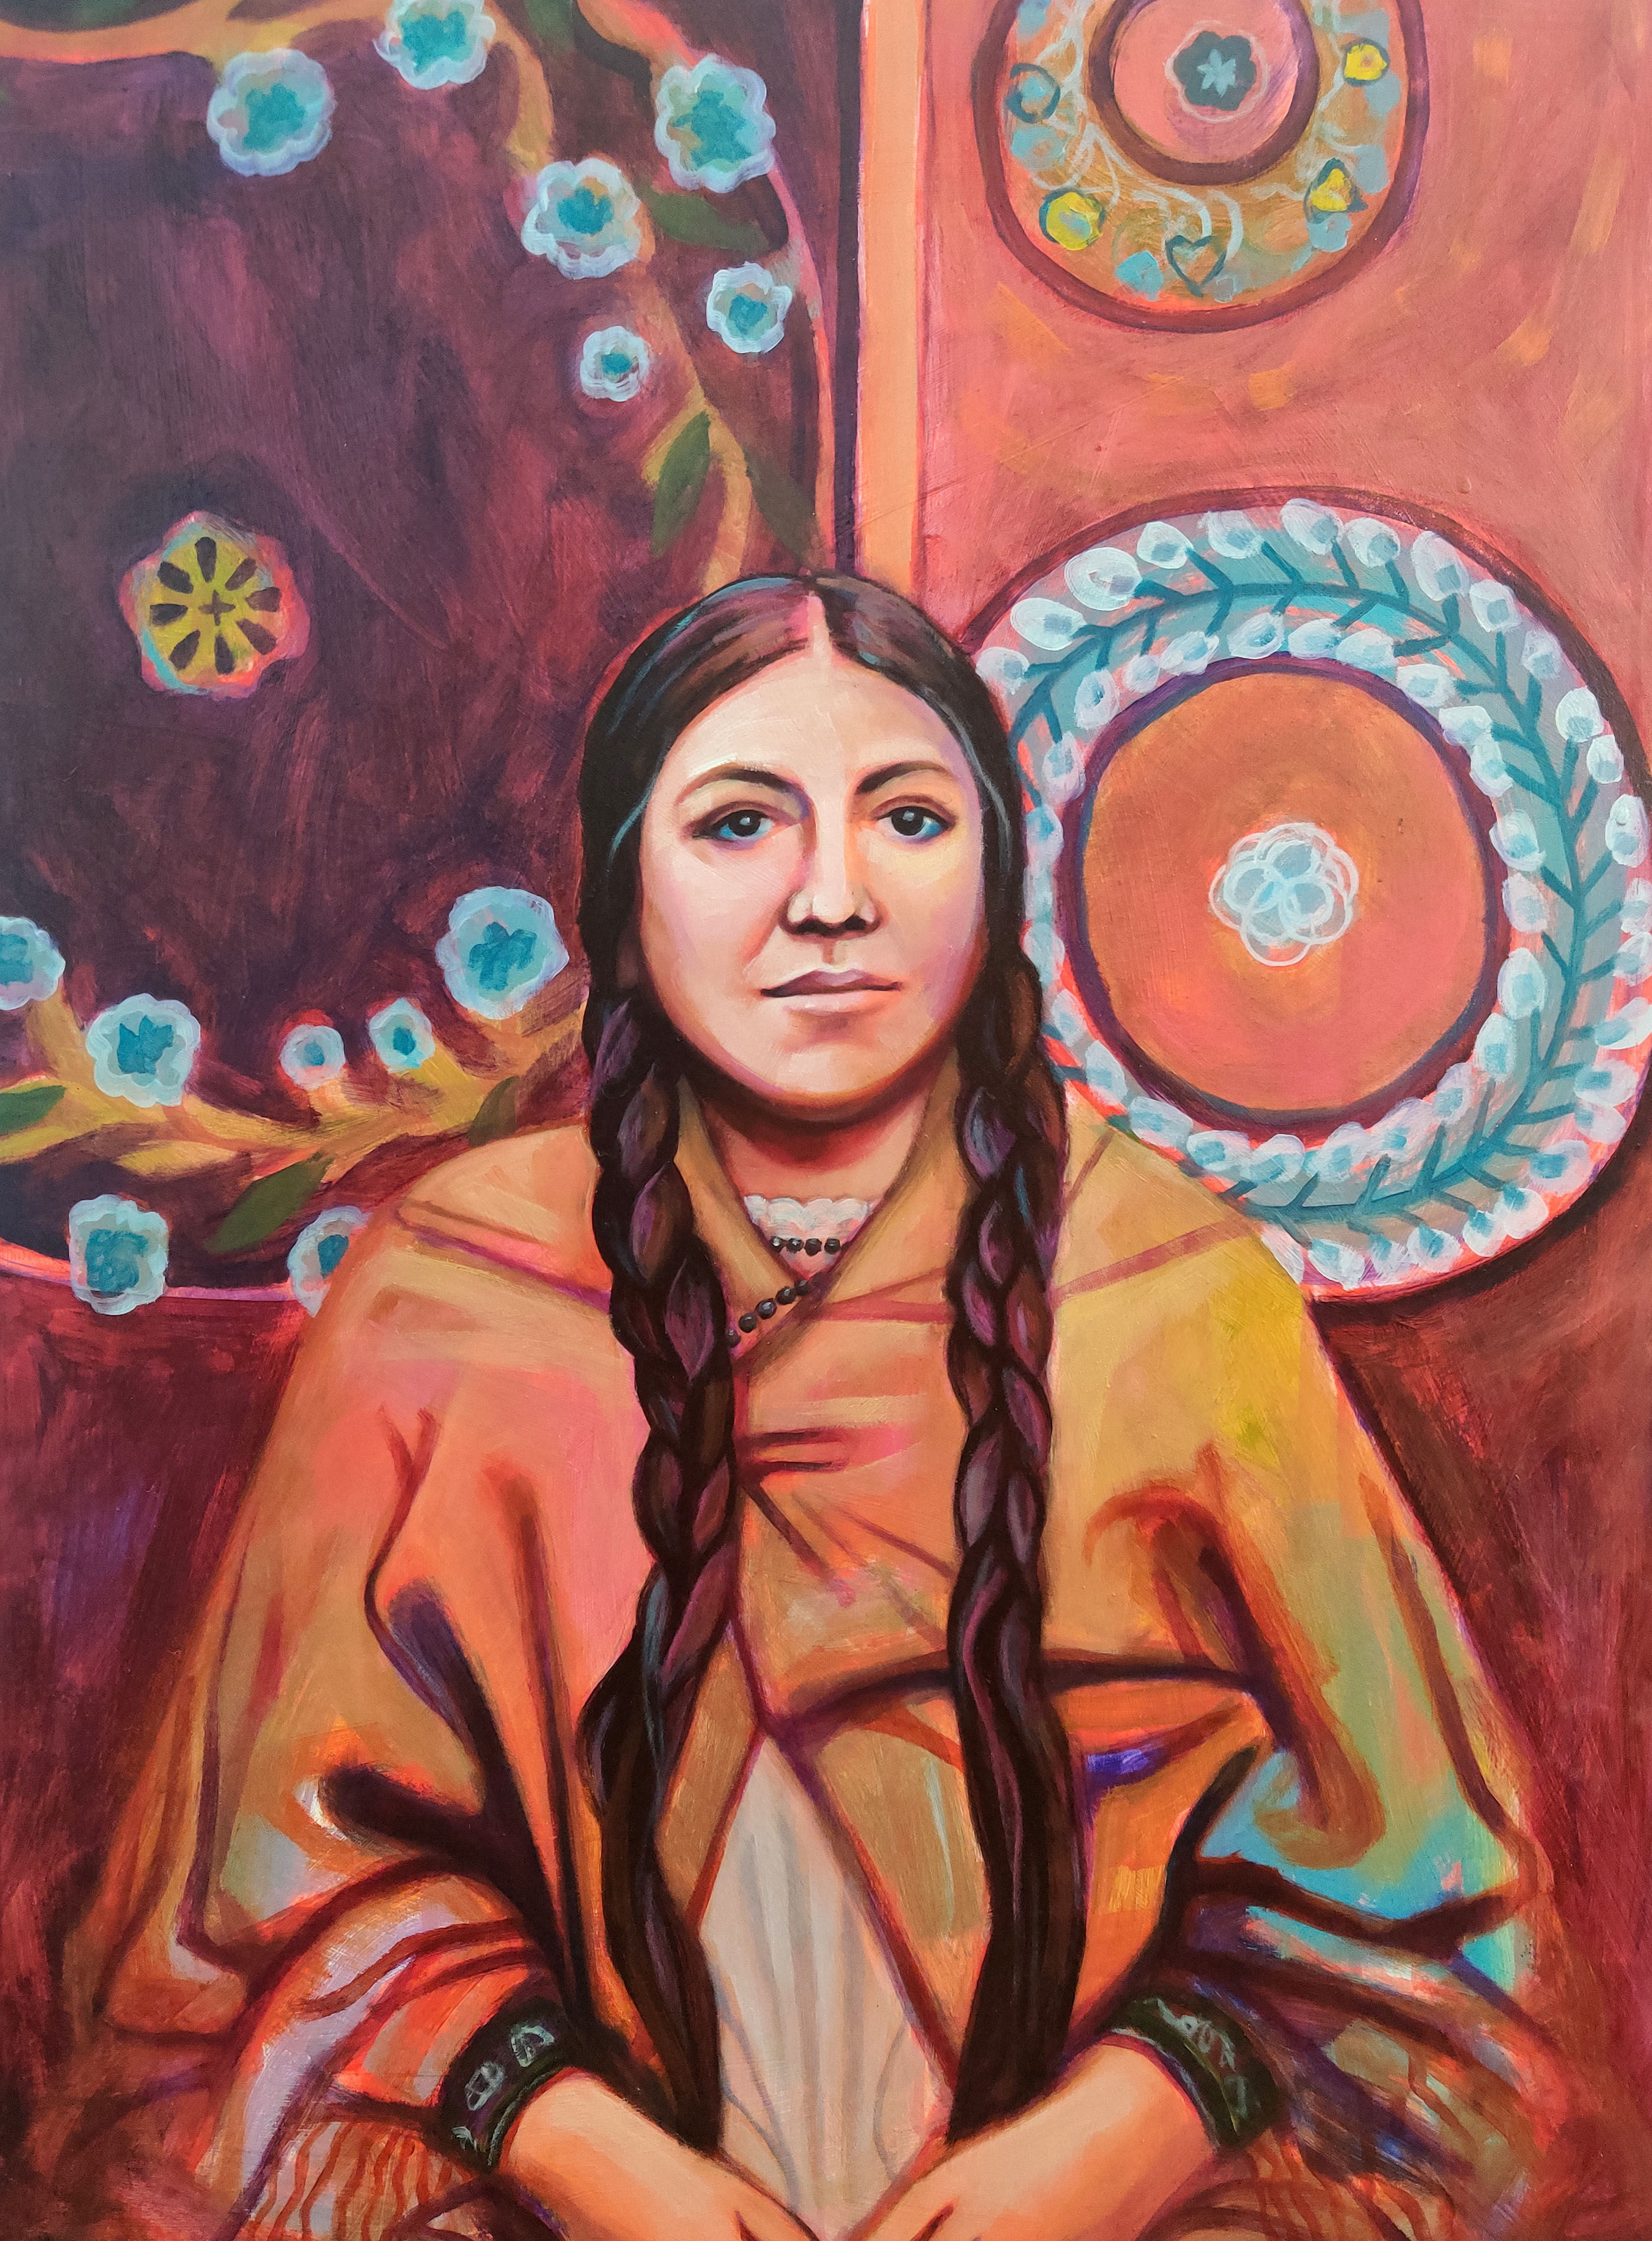 Oil on panel painting of a native american woman in indigenous clothing